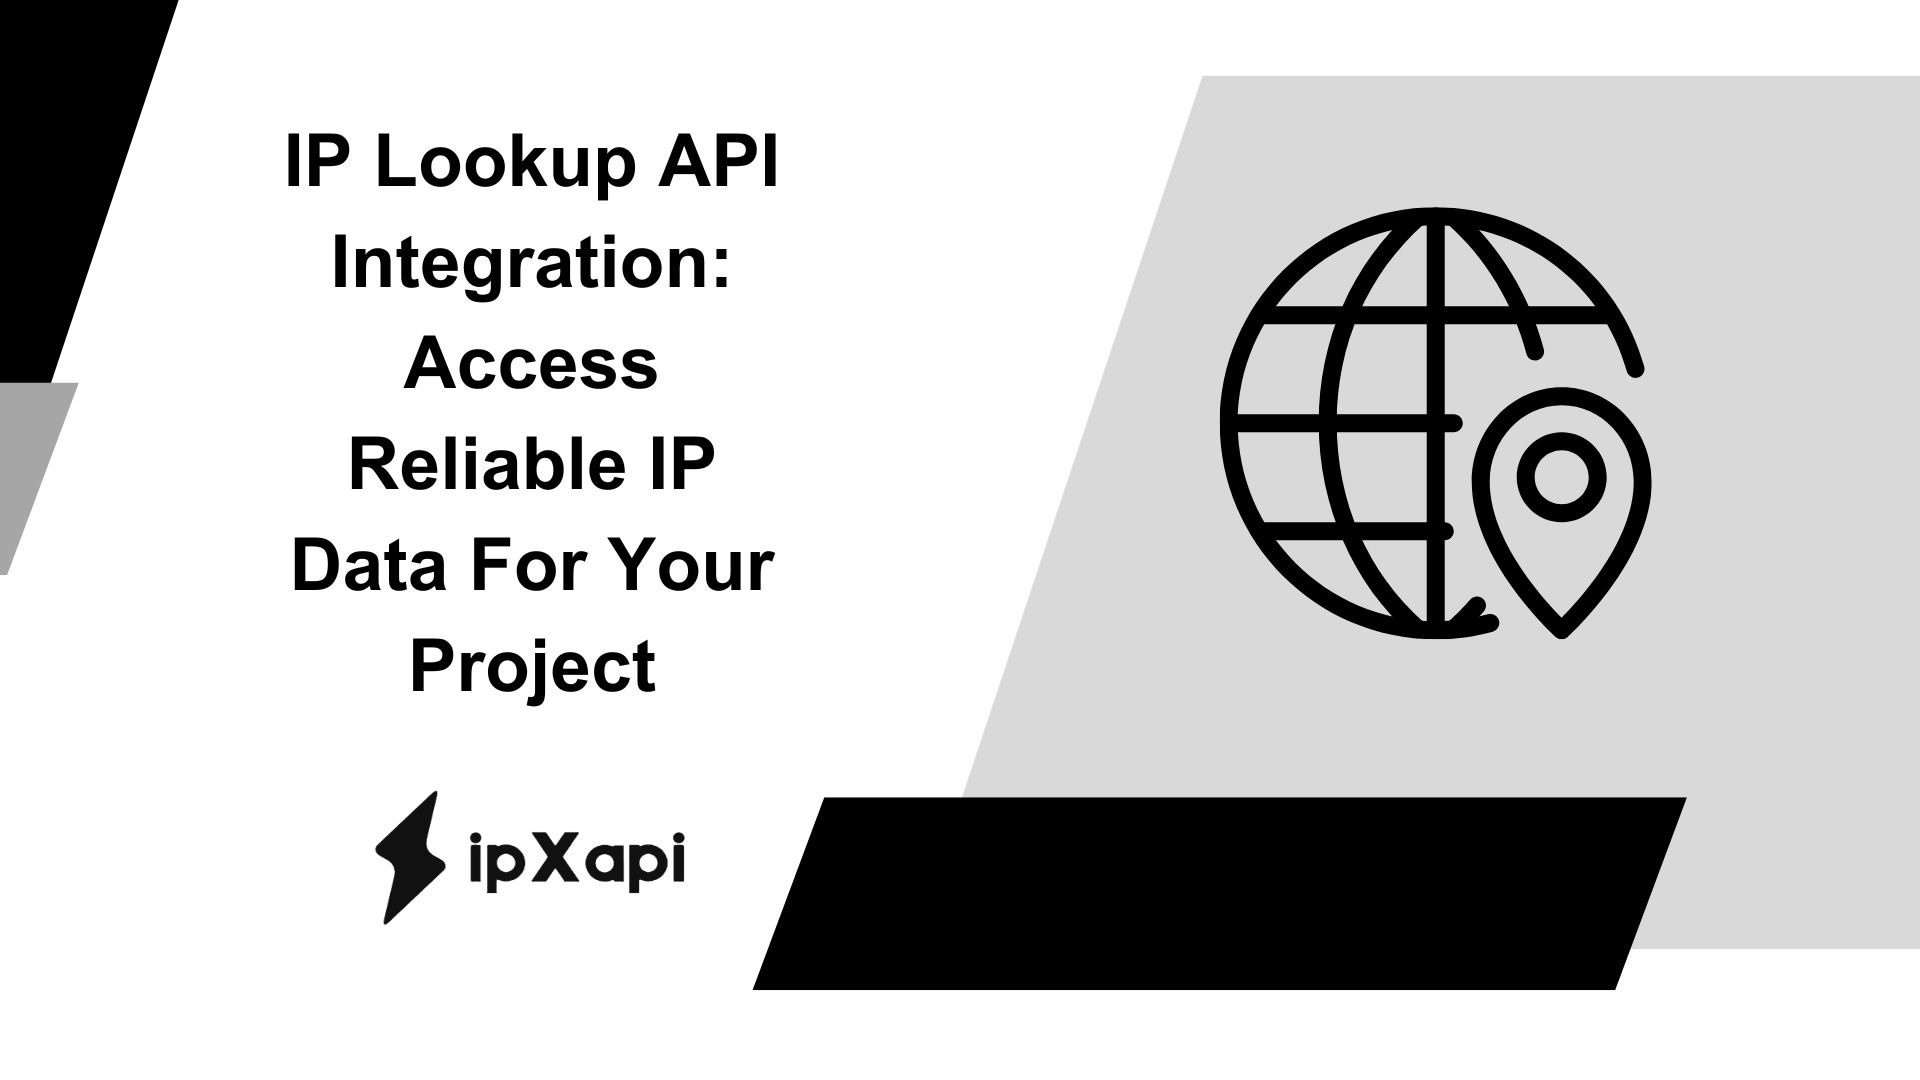 IP Lookup API Integration: Access Reliable IP Data For Your Project